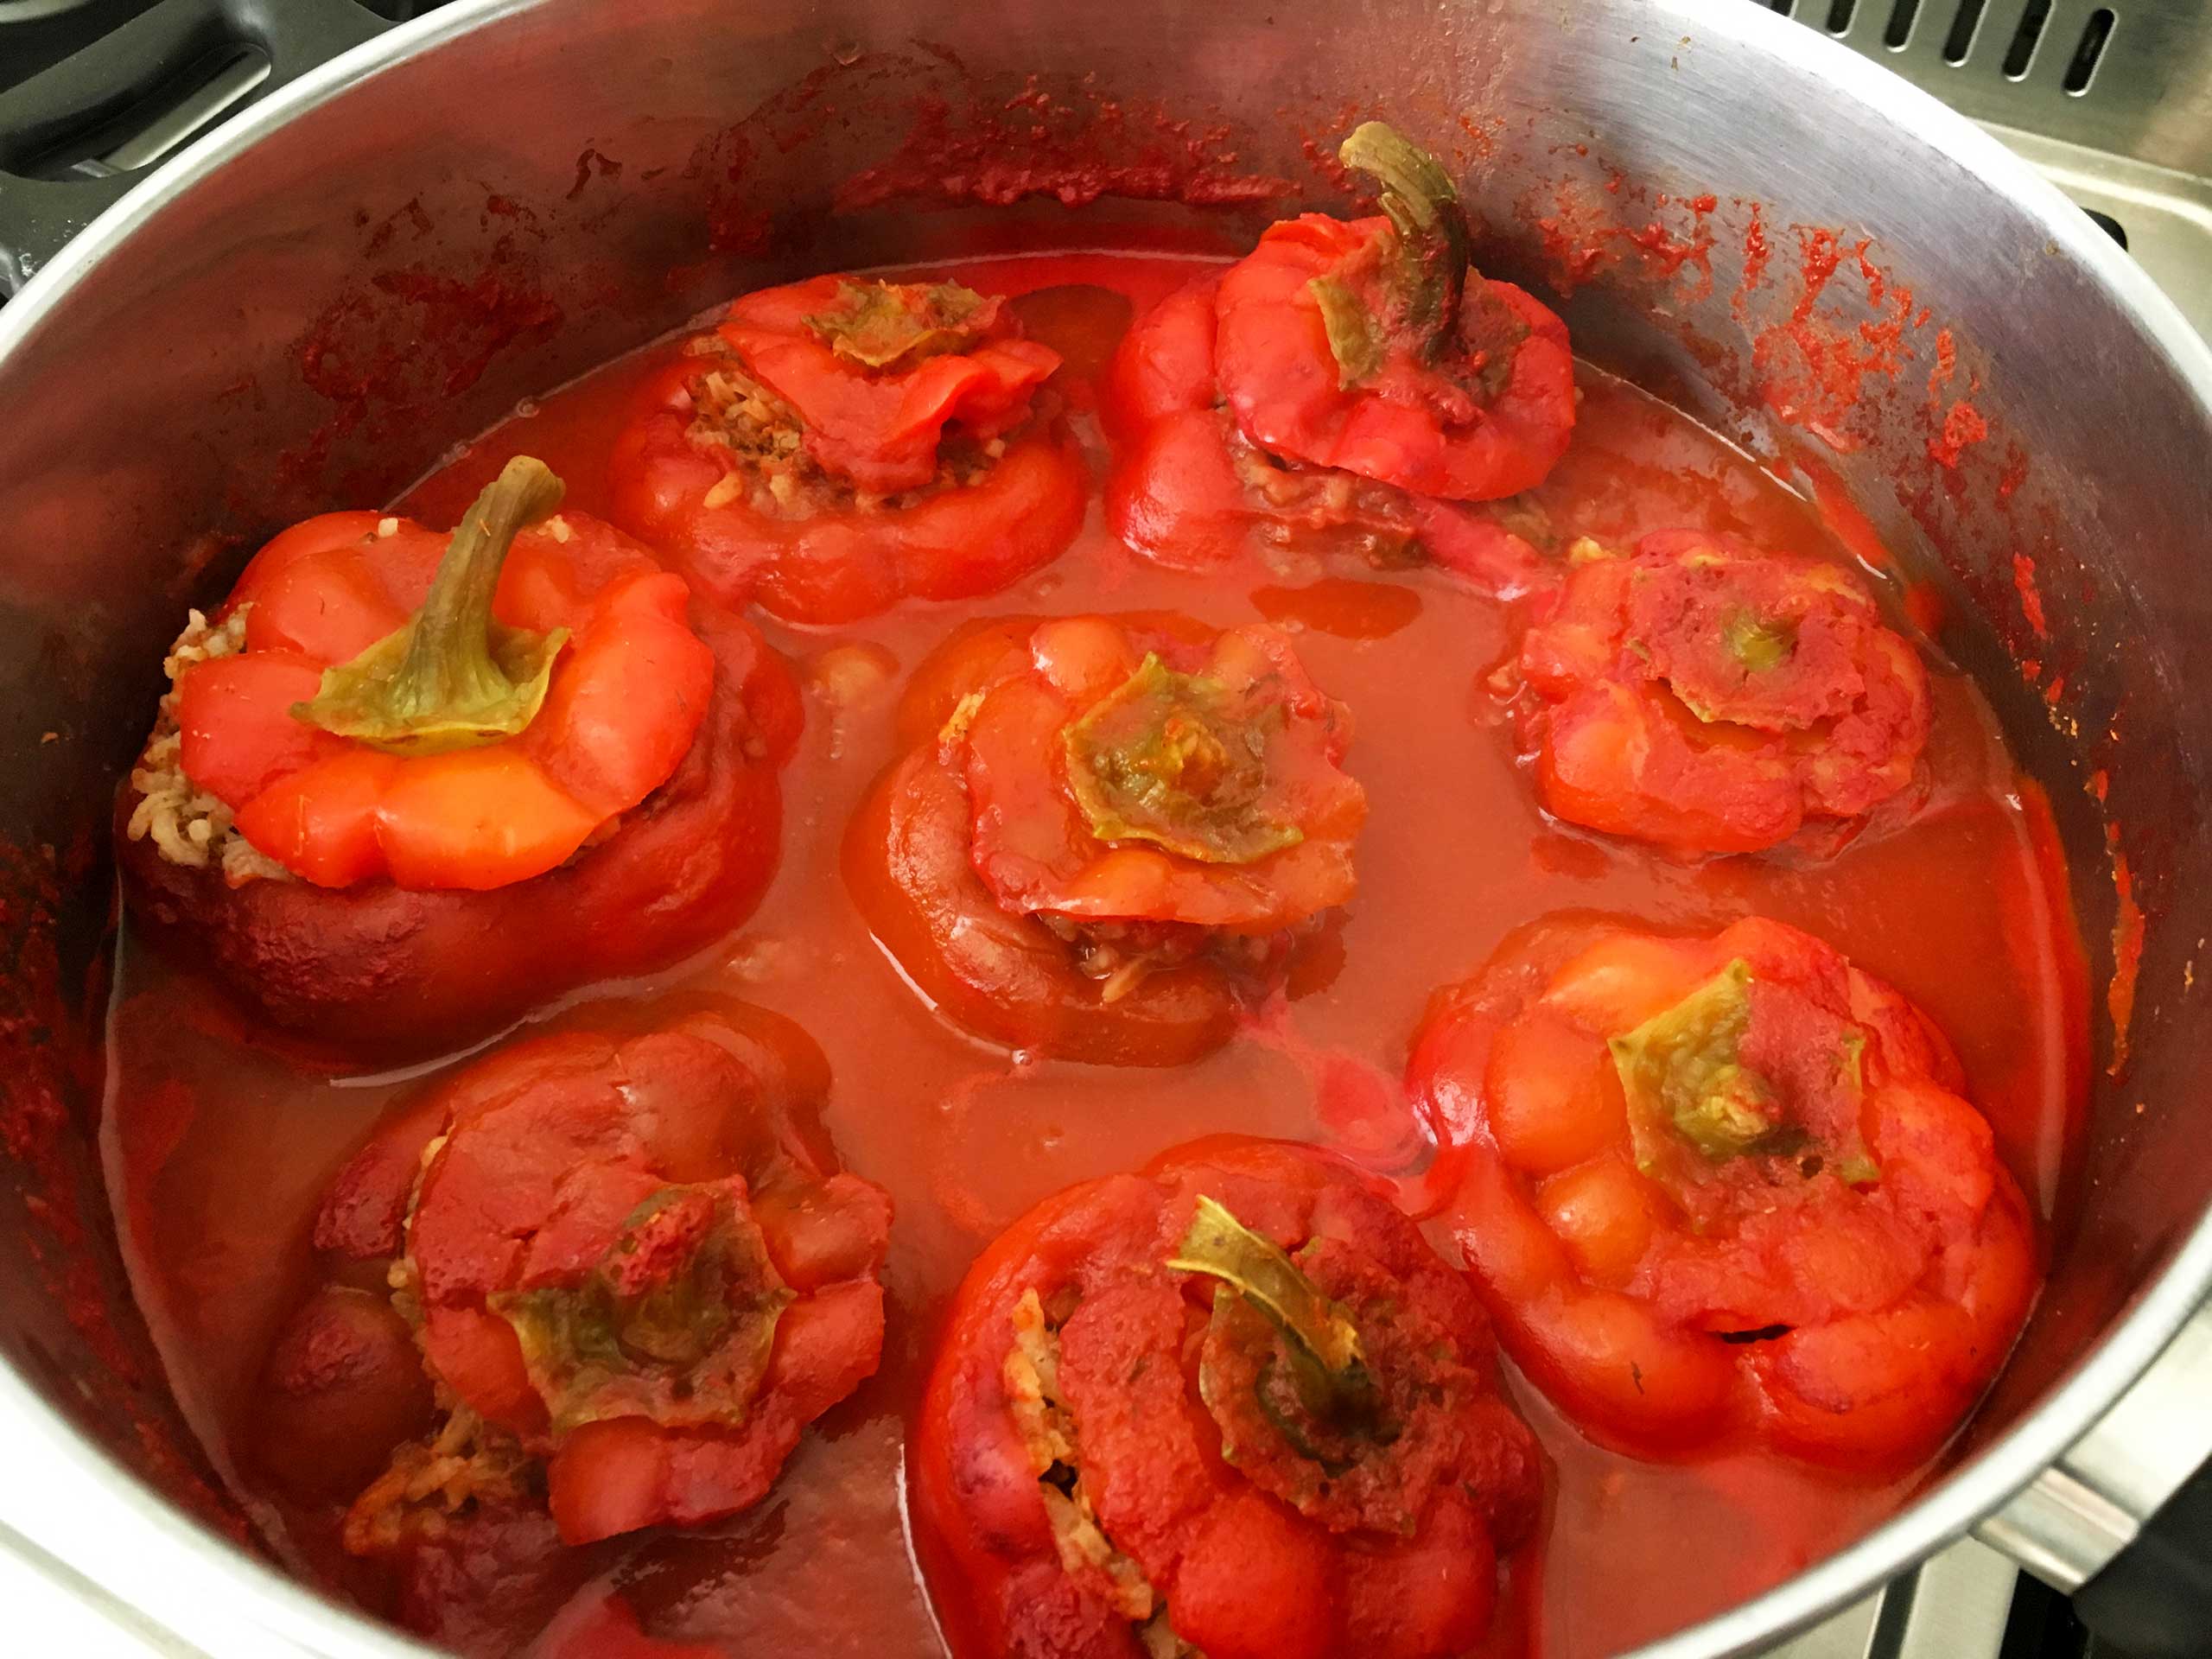 Amazing recipe for stuffed peppers filled with meat and rice